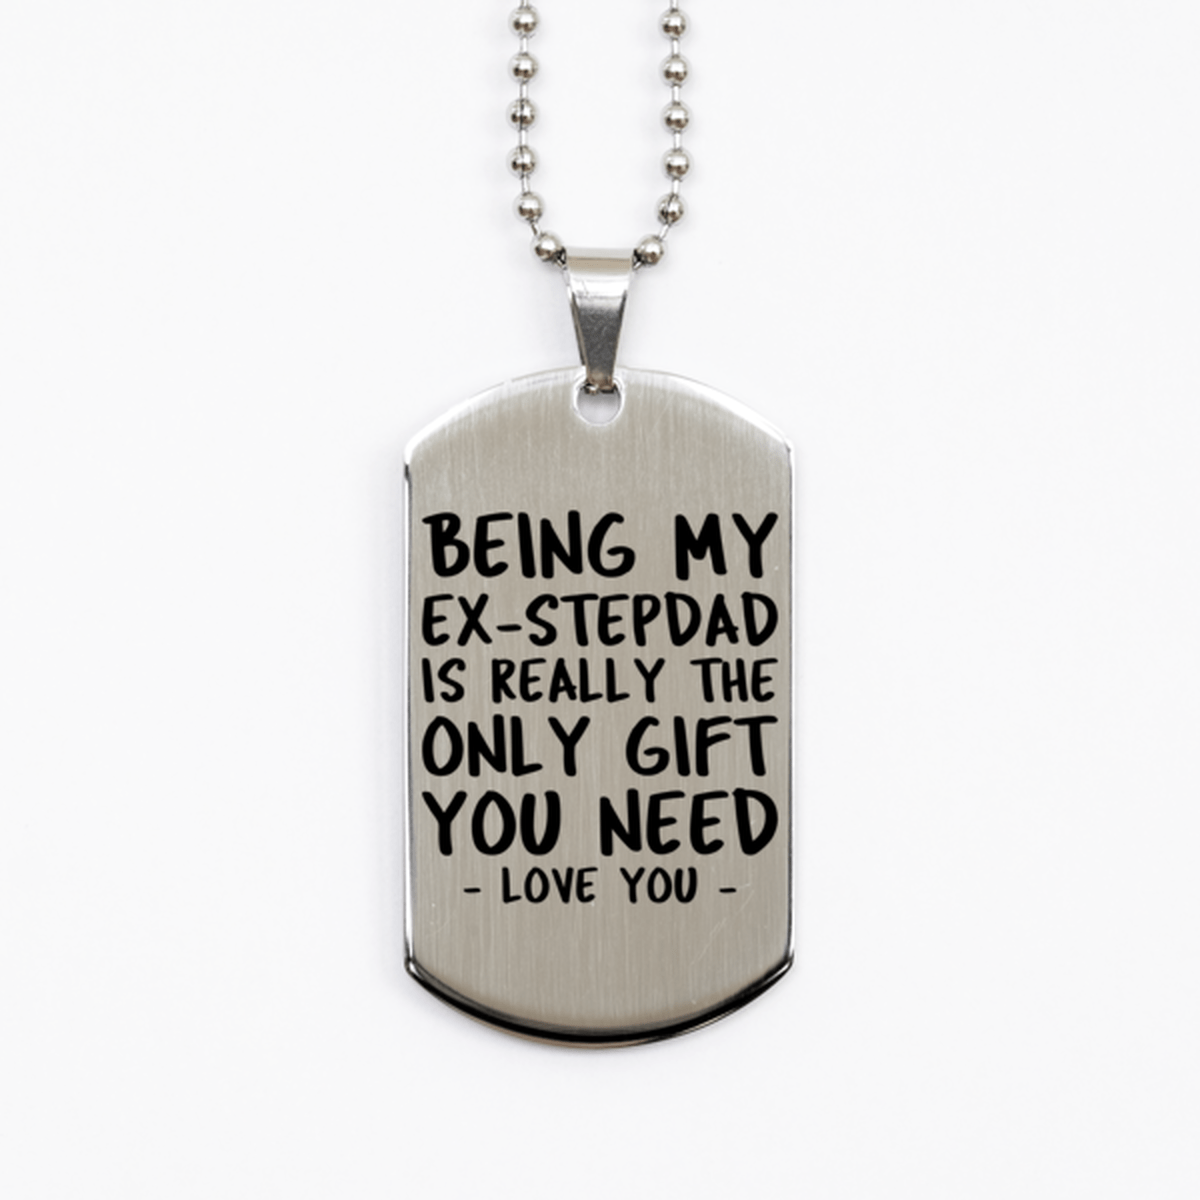 Funny Ex-stepdad Silver Dog Tag Necklace, Being My Ex-stepdad Is Really the Only Gift You Need, Best Birthday Gifts for Ex-stepdad